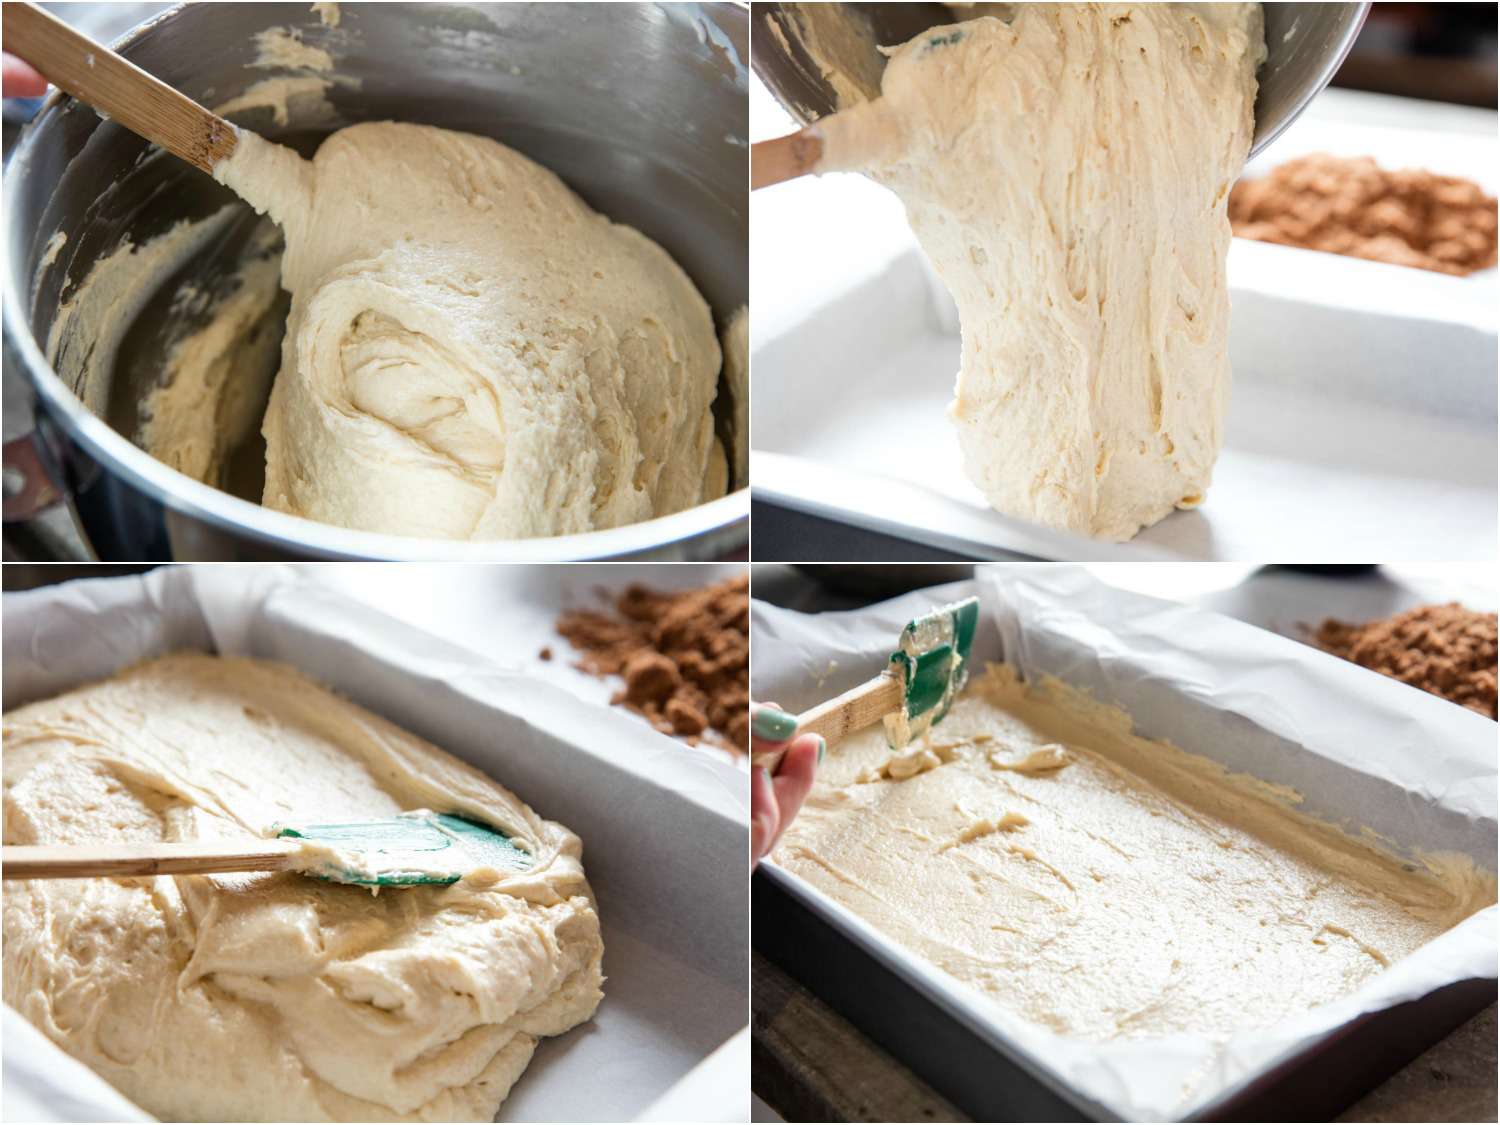 A four-image collage illustrating stages of folding, pouring, and spreading out coffee cake batter in a lined cake pan.